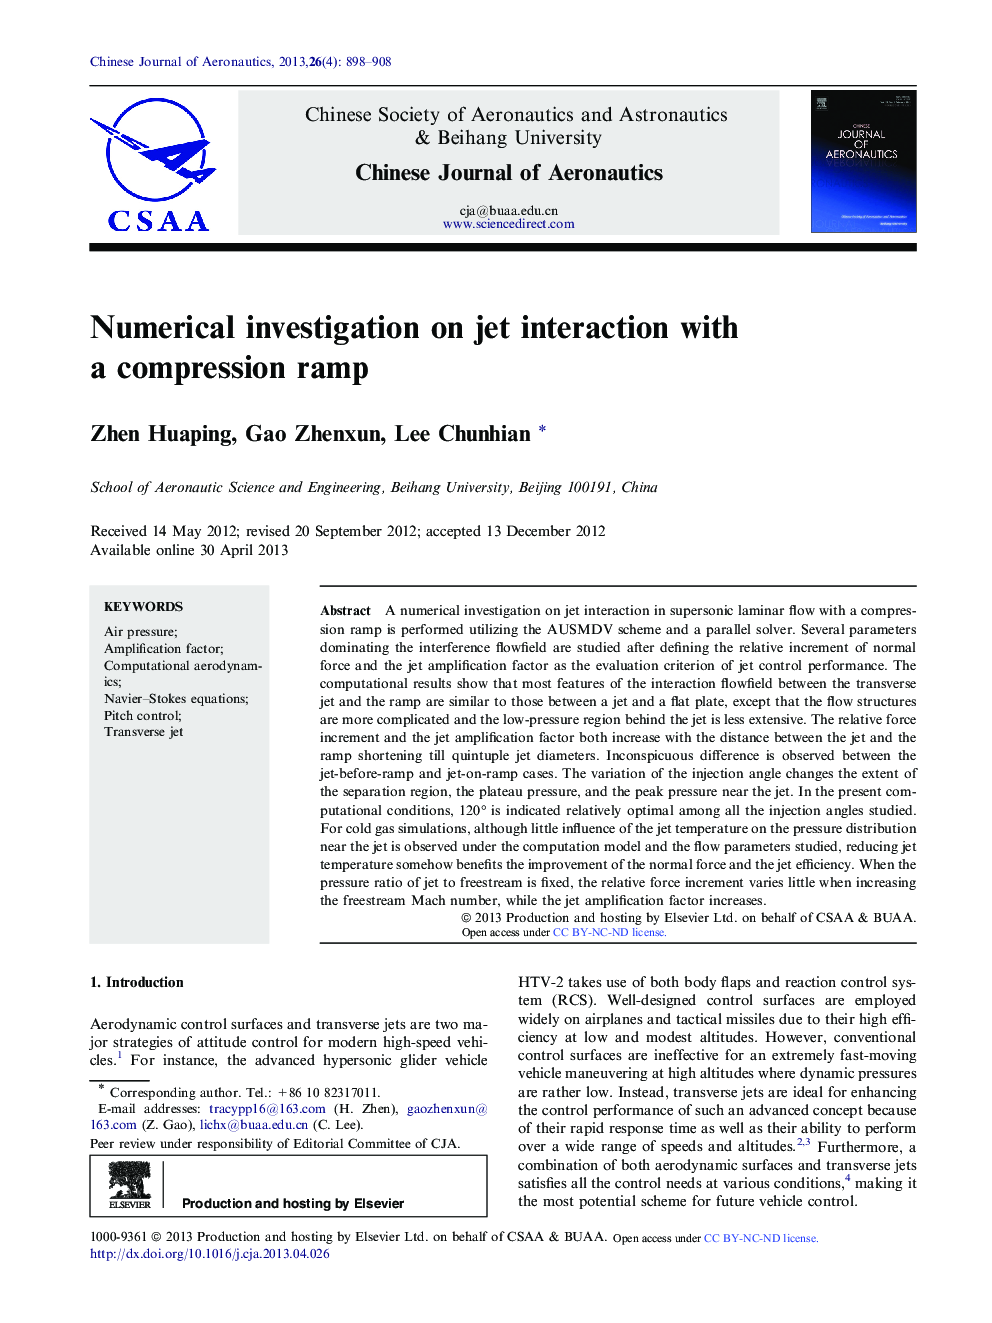 Numerical investigation on jet interaction with a compression ramp 